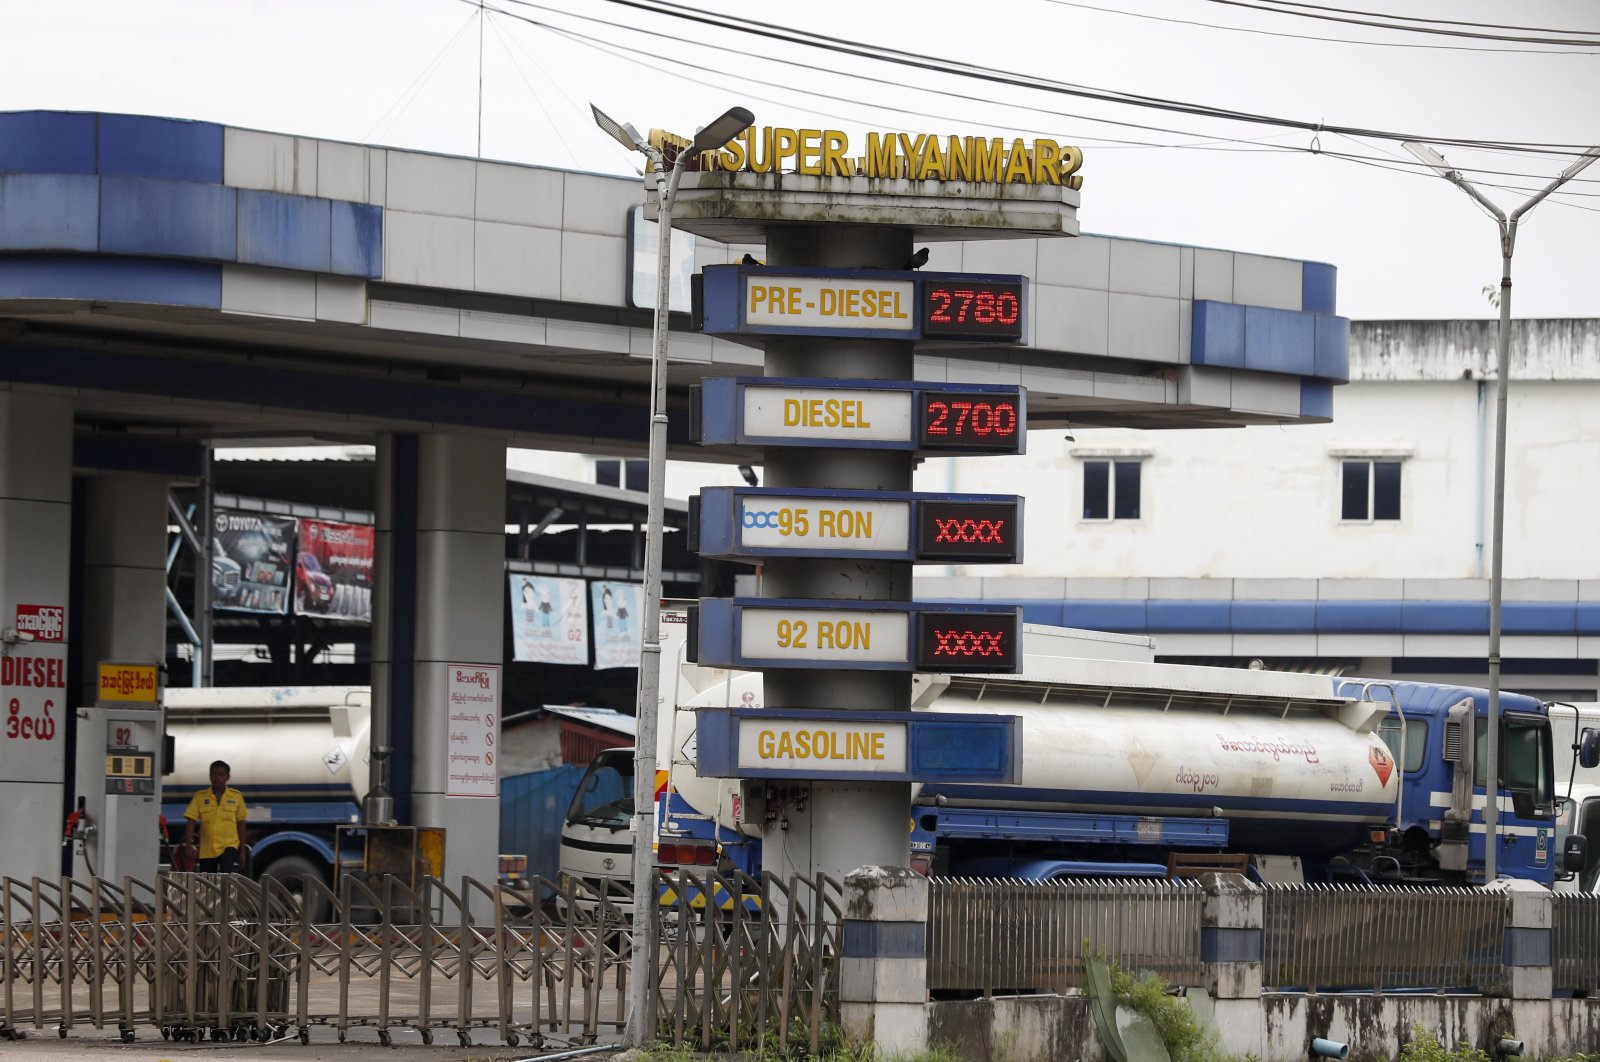 A sign shows prices for various automotive fuels at a gas station in Yangon, Myanmar, Aug. 16, 2022. (EPA Photo)